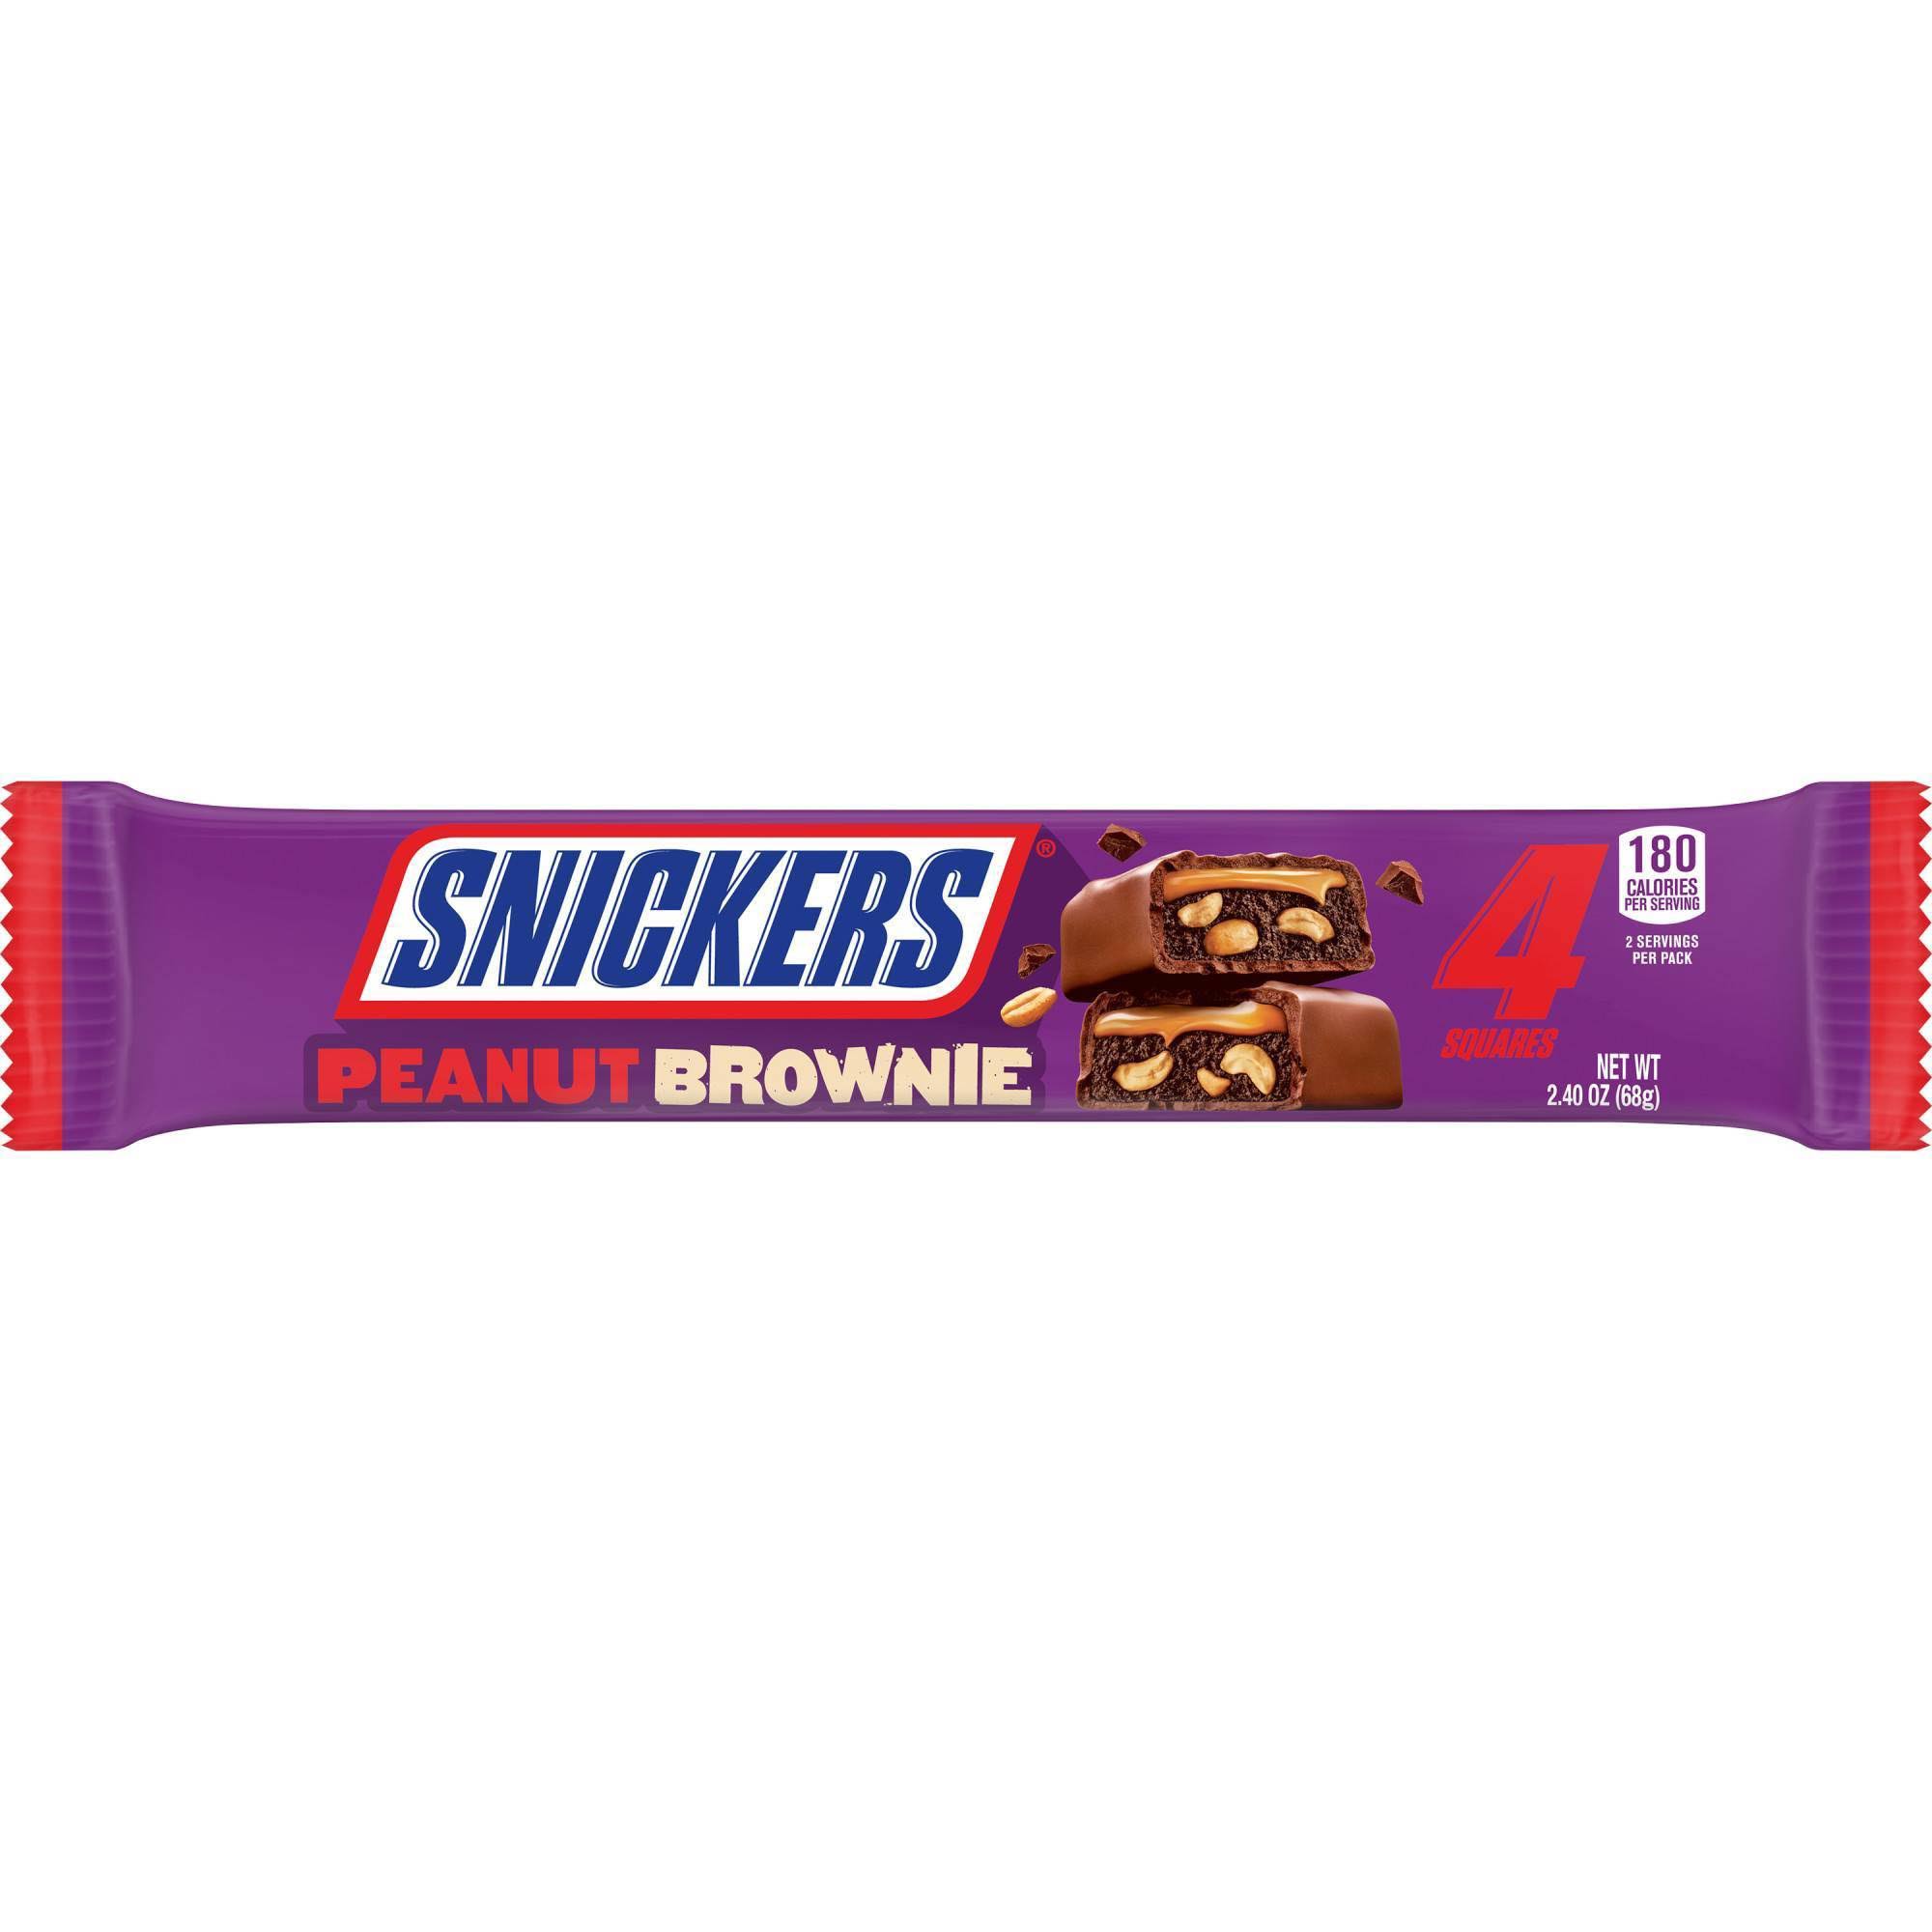 Snickers Squares Share Size Chocolate Candy Bar, Peanut Brownie, 2.4 O